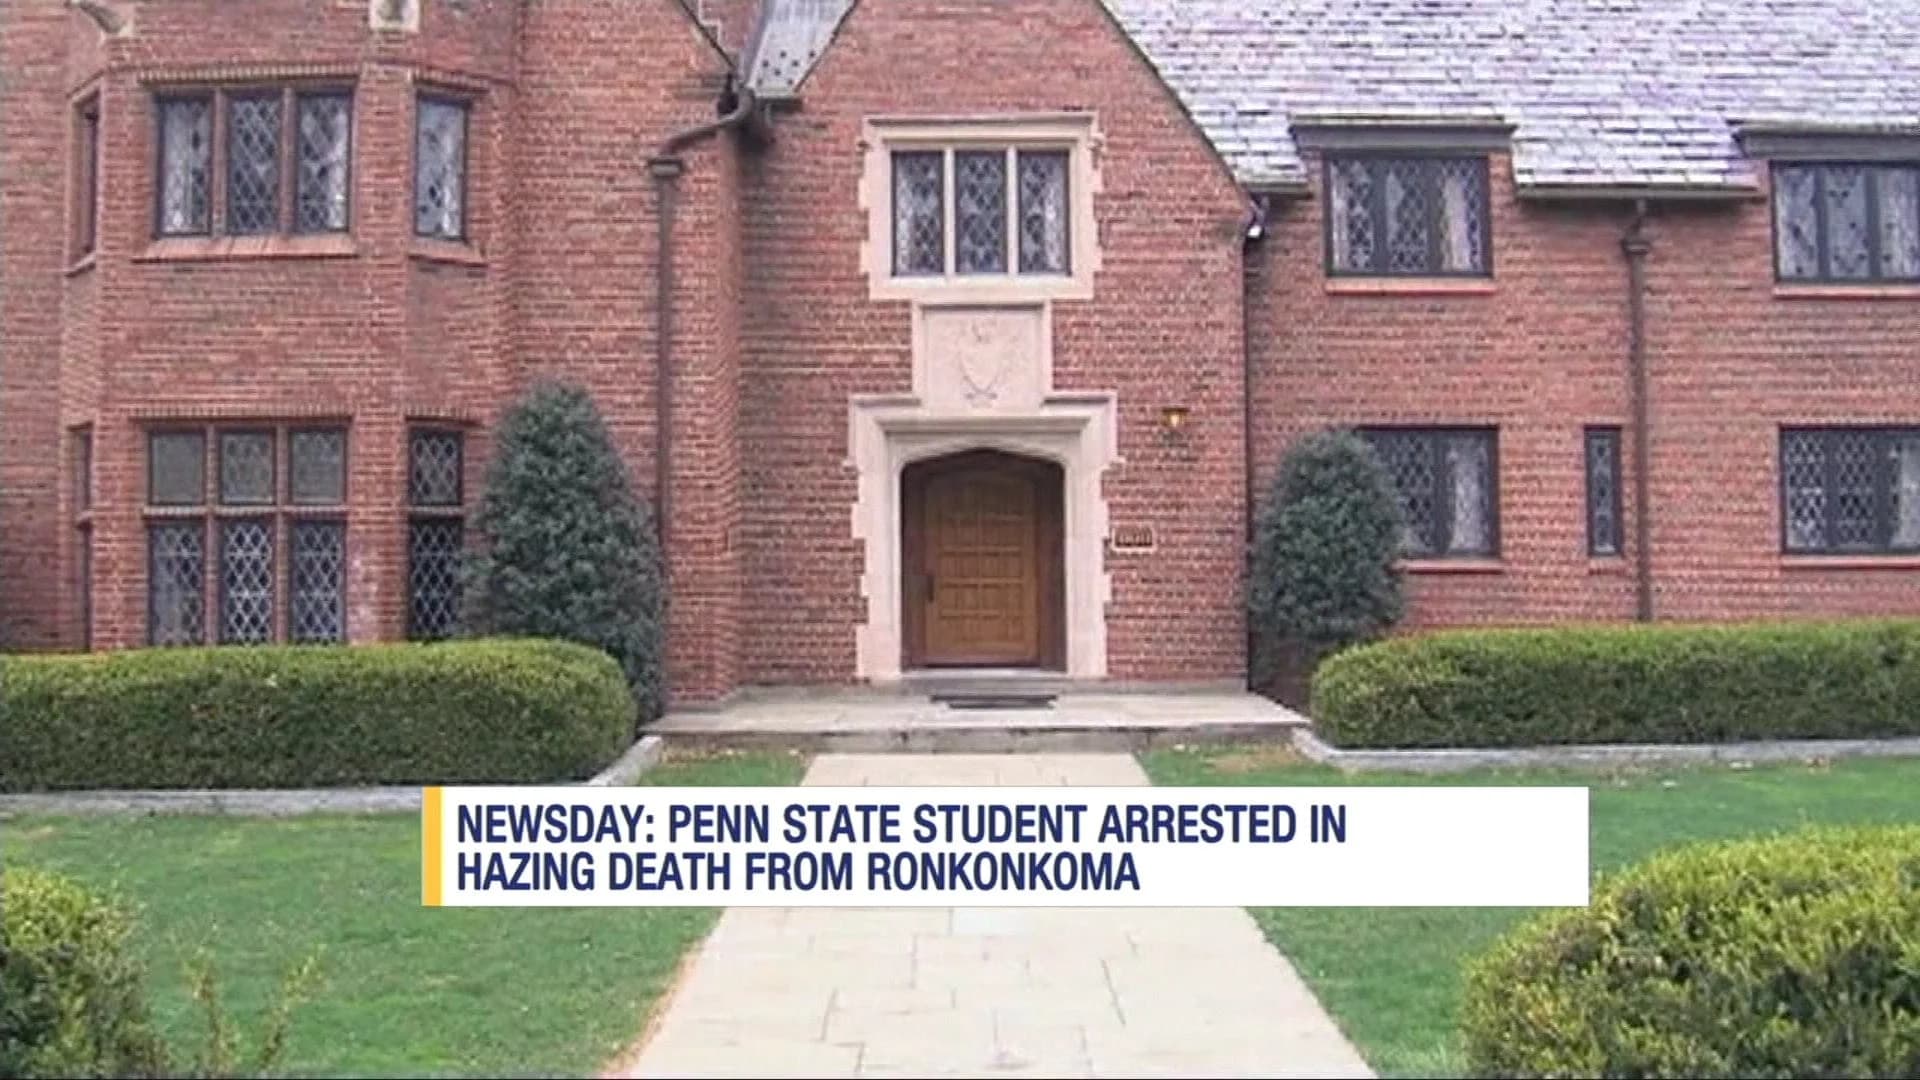 LI man among 18 Penn State students charged in hazing death